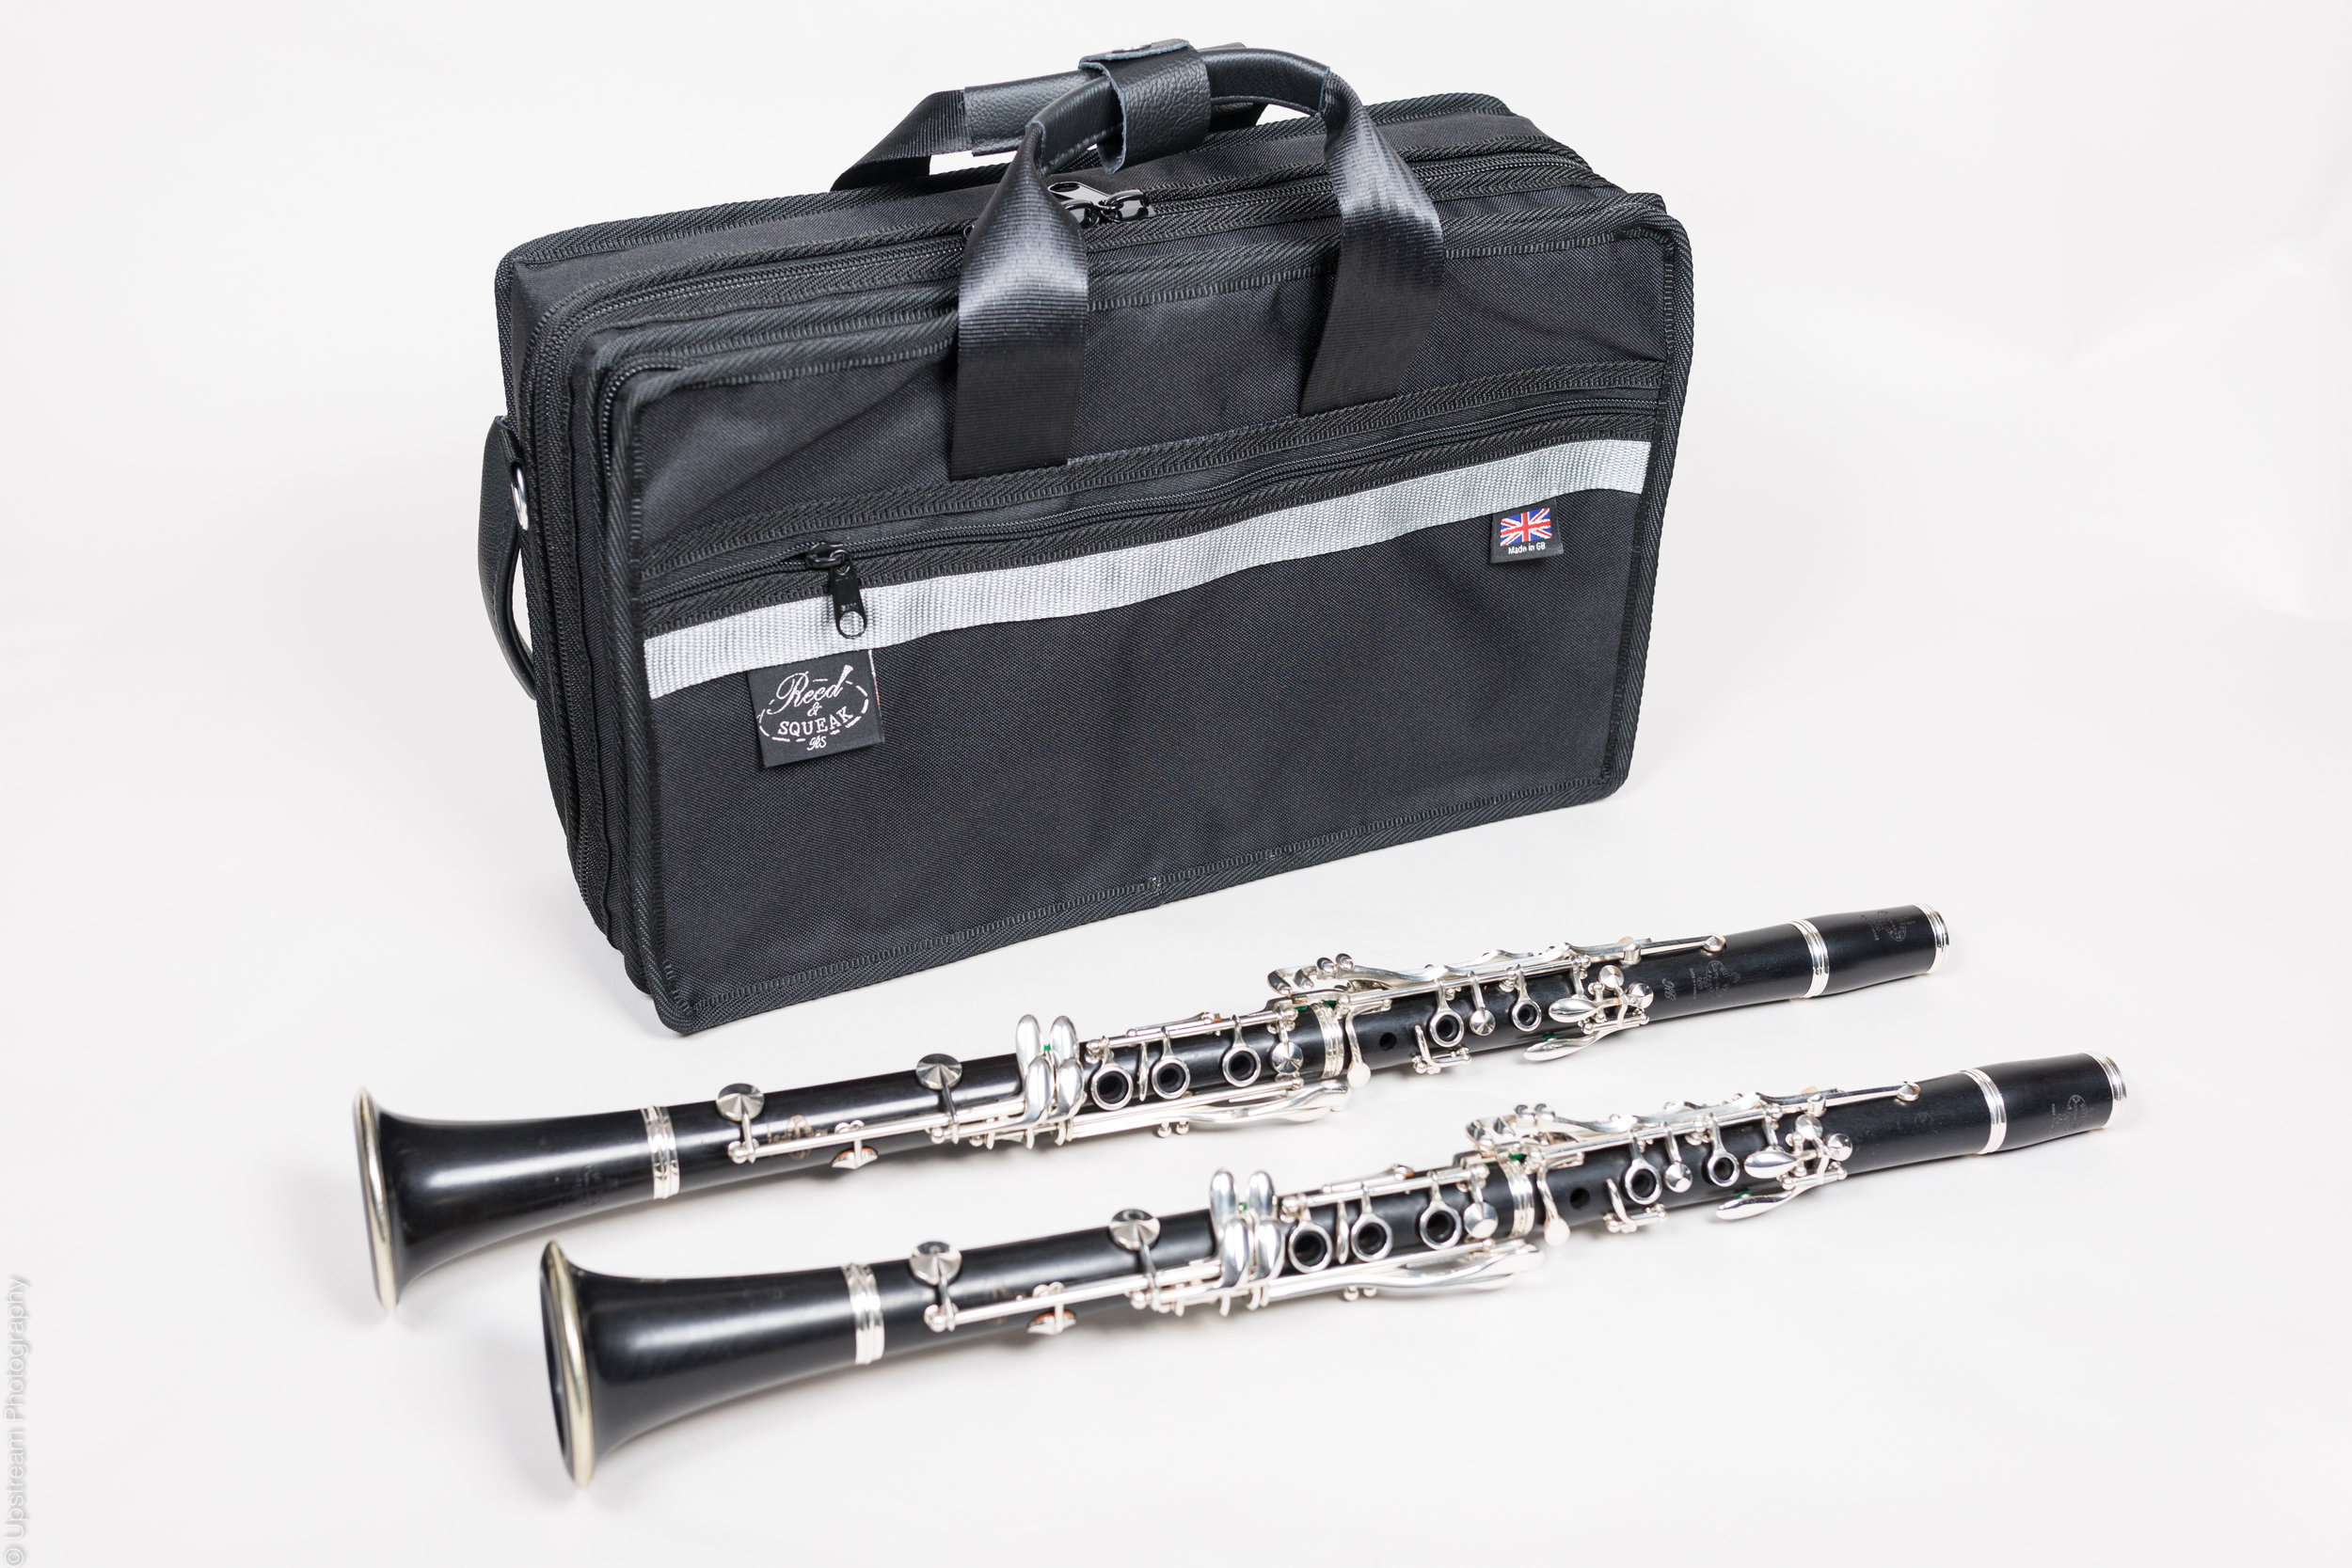 Clarinet case for sale-Compact Double Case